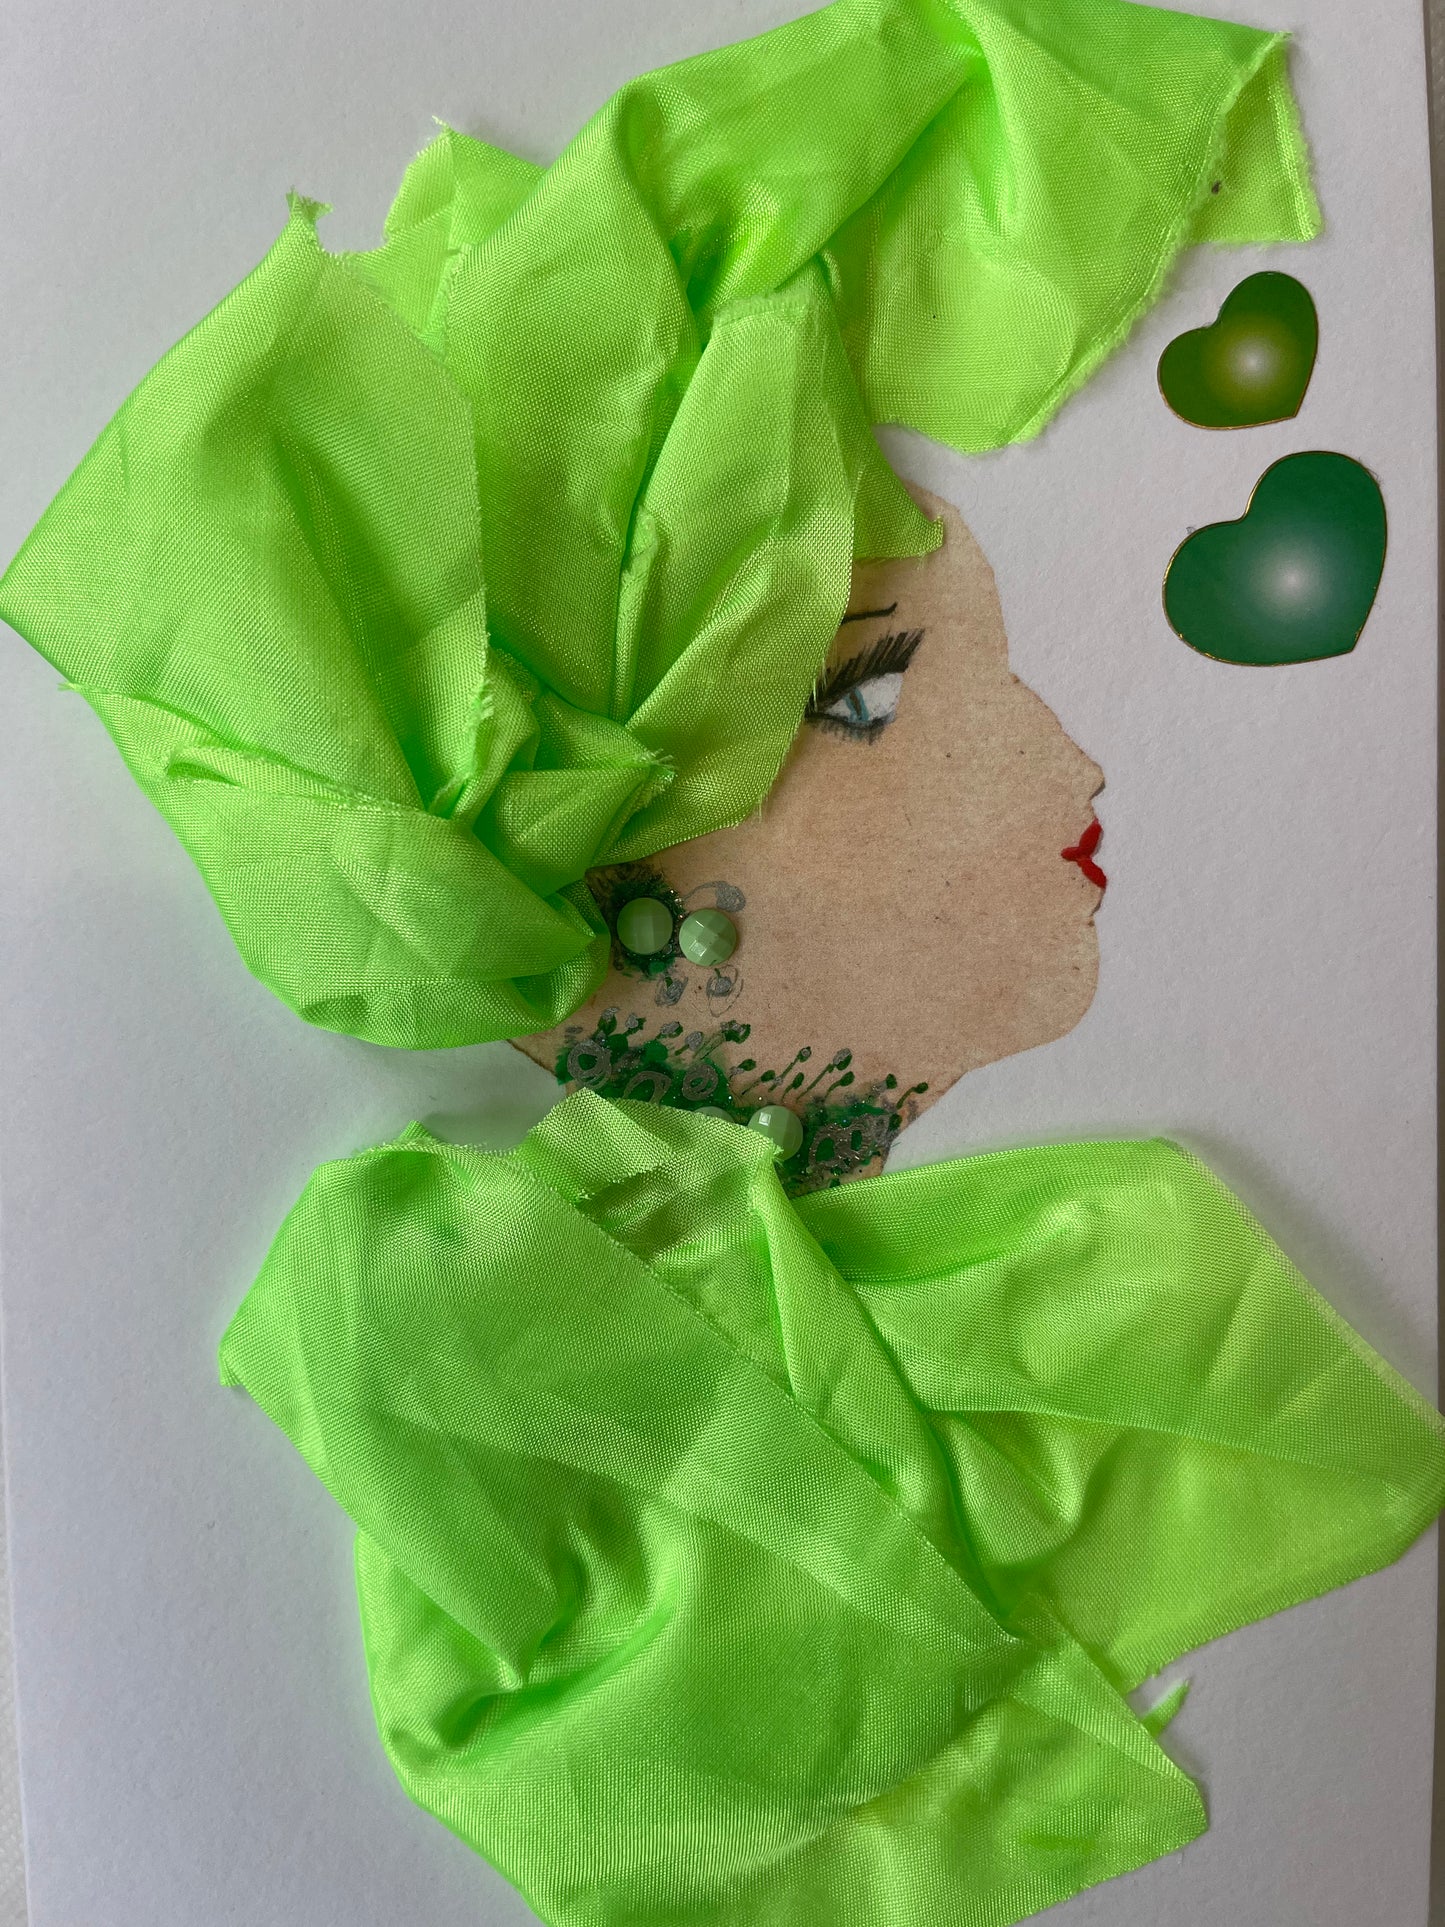 This card depicts a woman named Lucy. Lucy wears a matching blouse and headdress which are a lime green silk material. Her jewellery is green and simple. In the righthand corner, there are two hearts that are also green. 